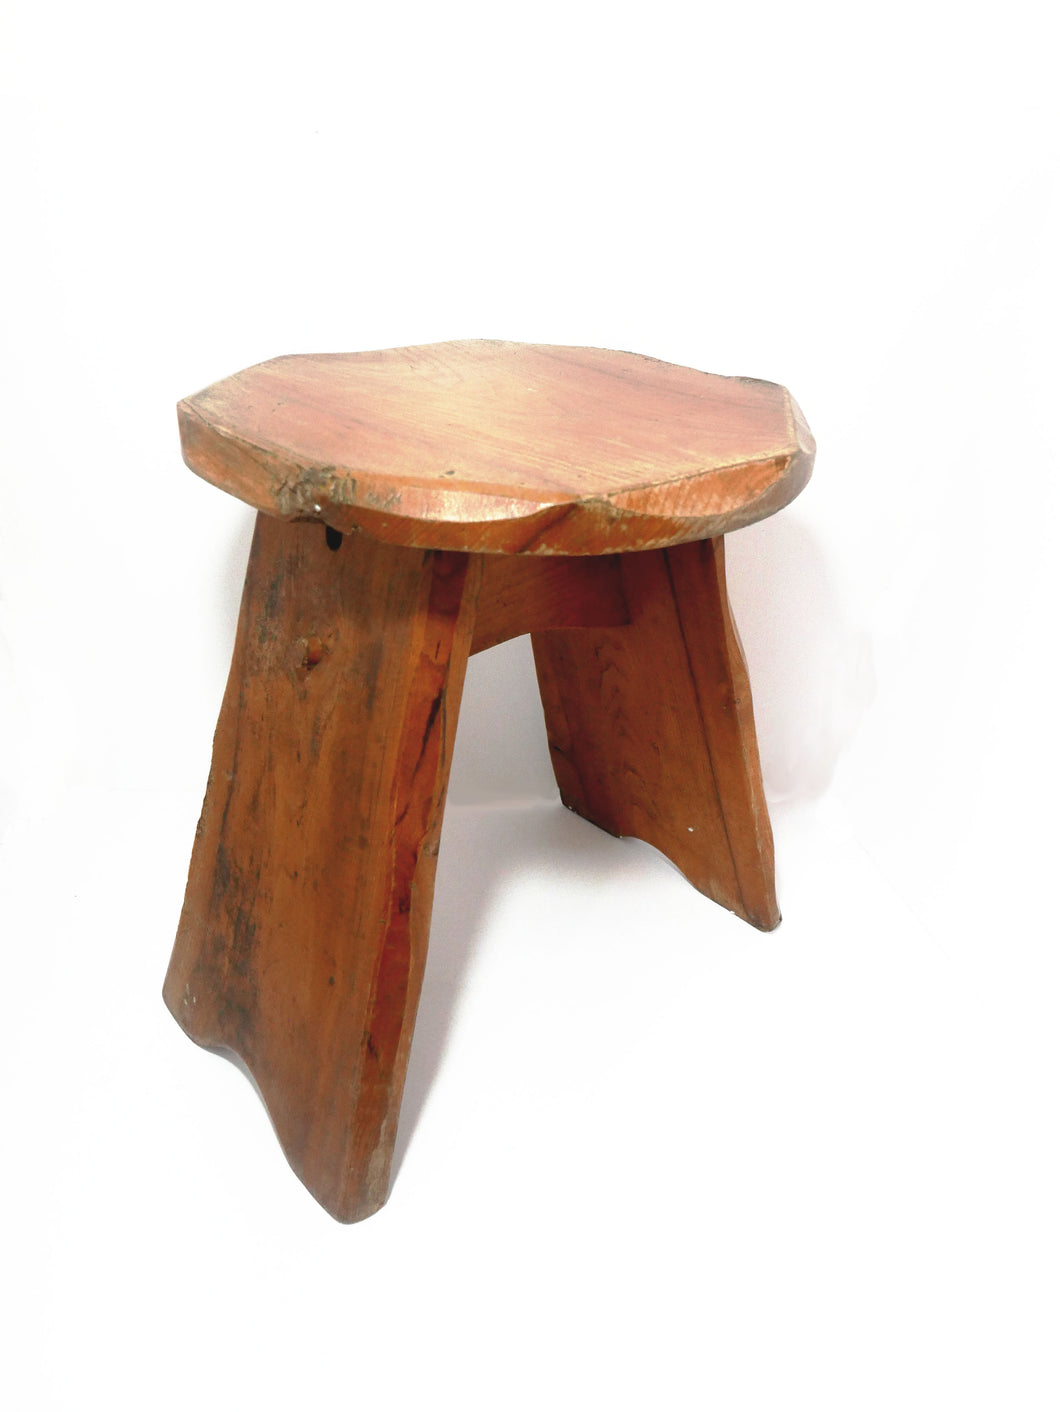 Rustic Wooden Stool